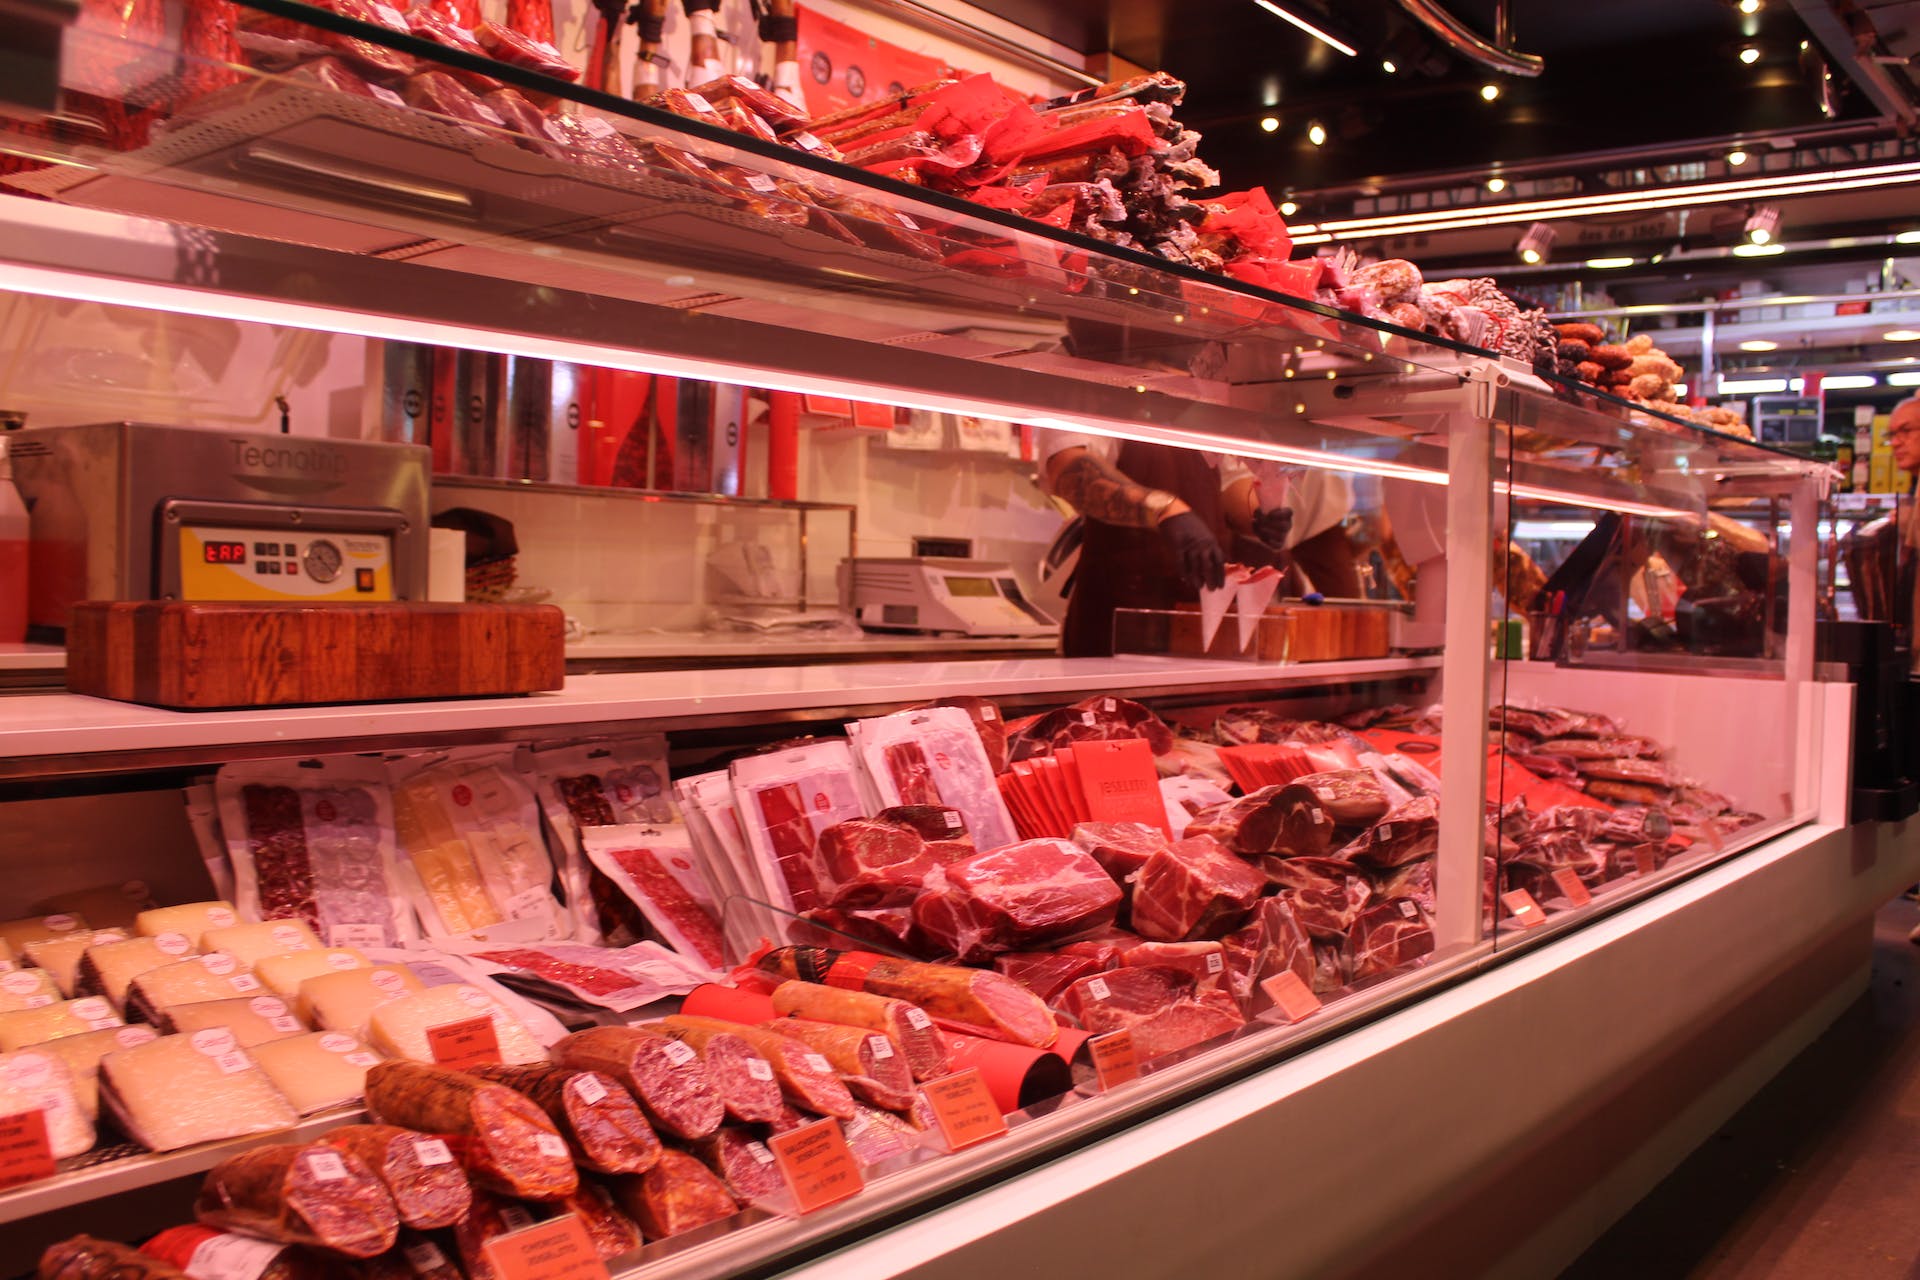 Butchery with different meat | Source: Pexels